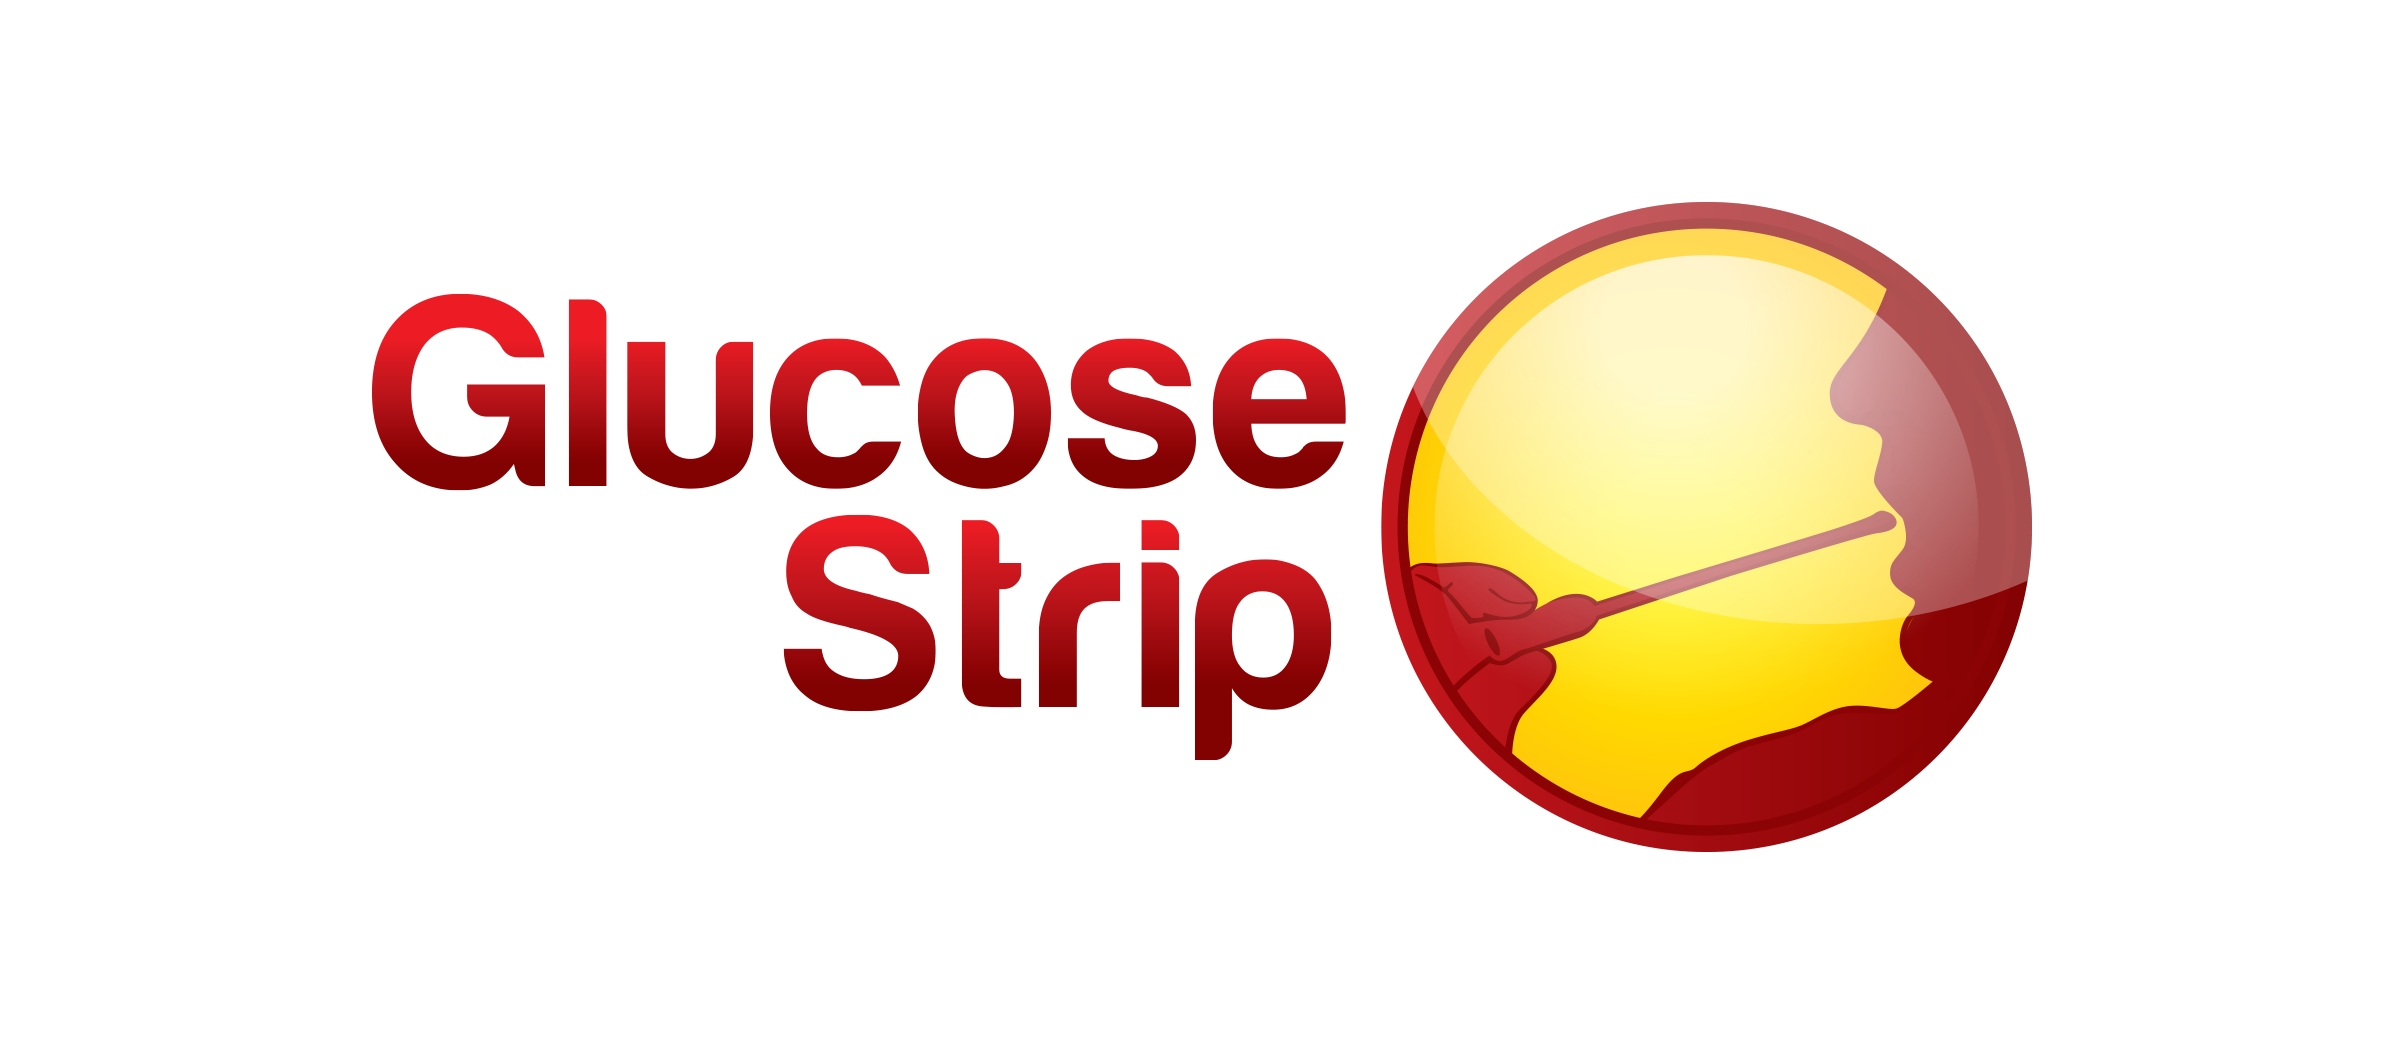 Glucose Strip, a medical invention created to provide a new and improved way of providing help for Hypoglycemic patients.